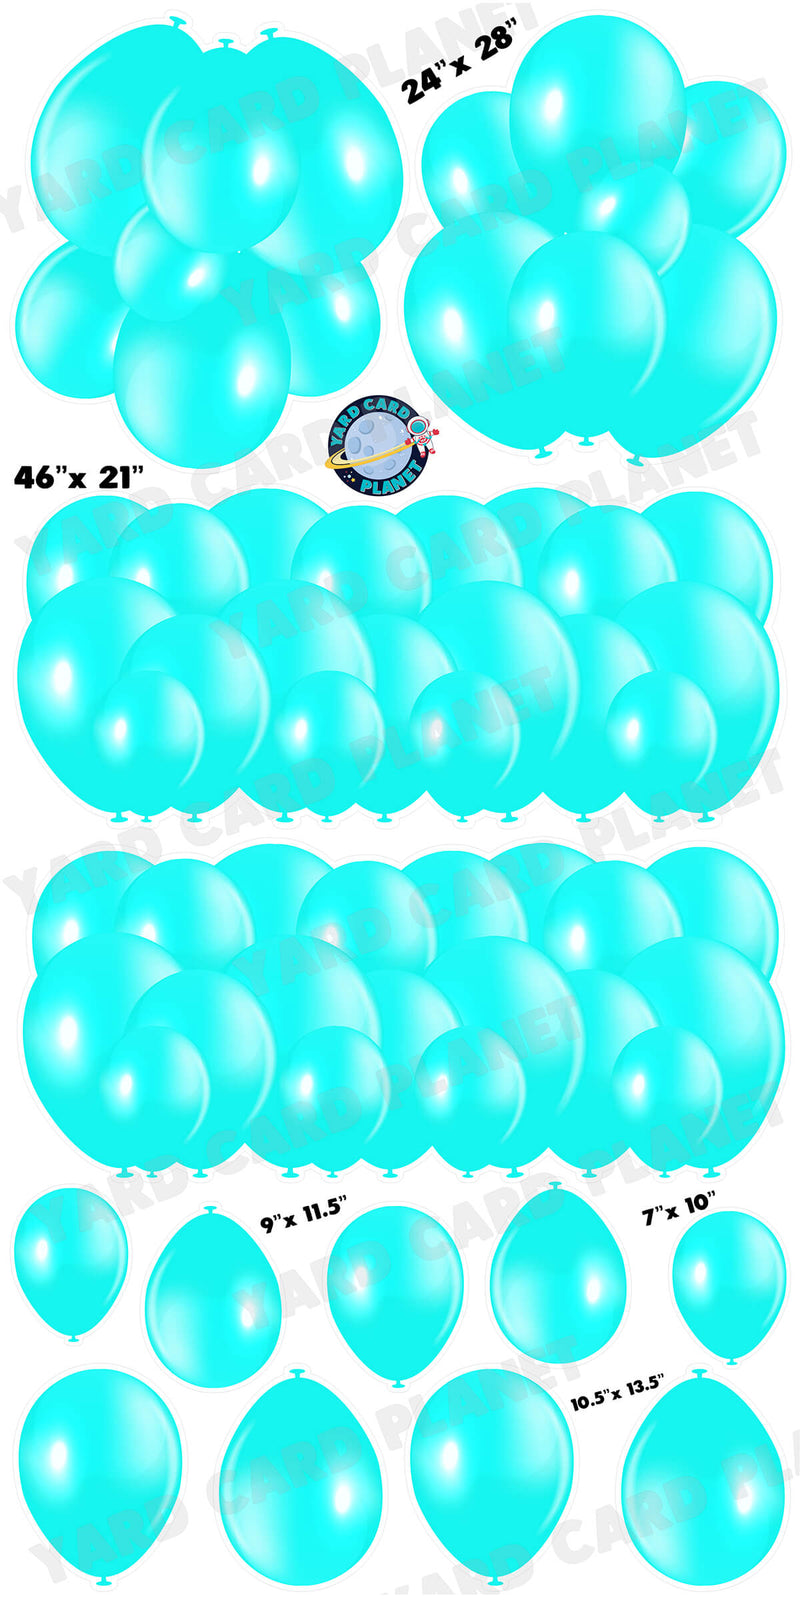 Neon Ice Blue Balloon Panels, Bouquets and Singles Yard Card Set